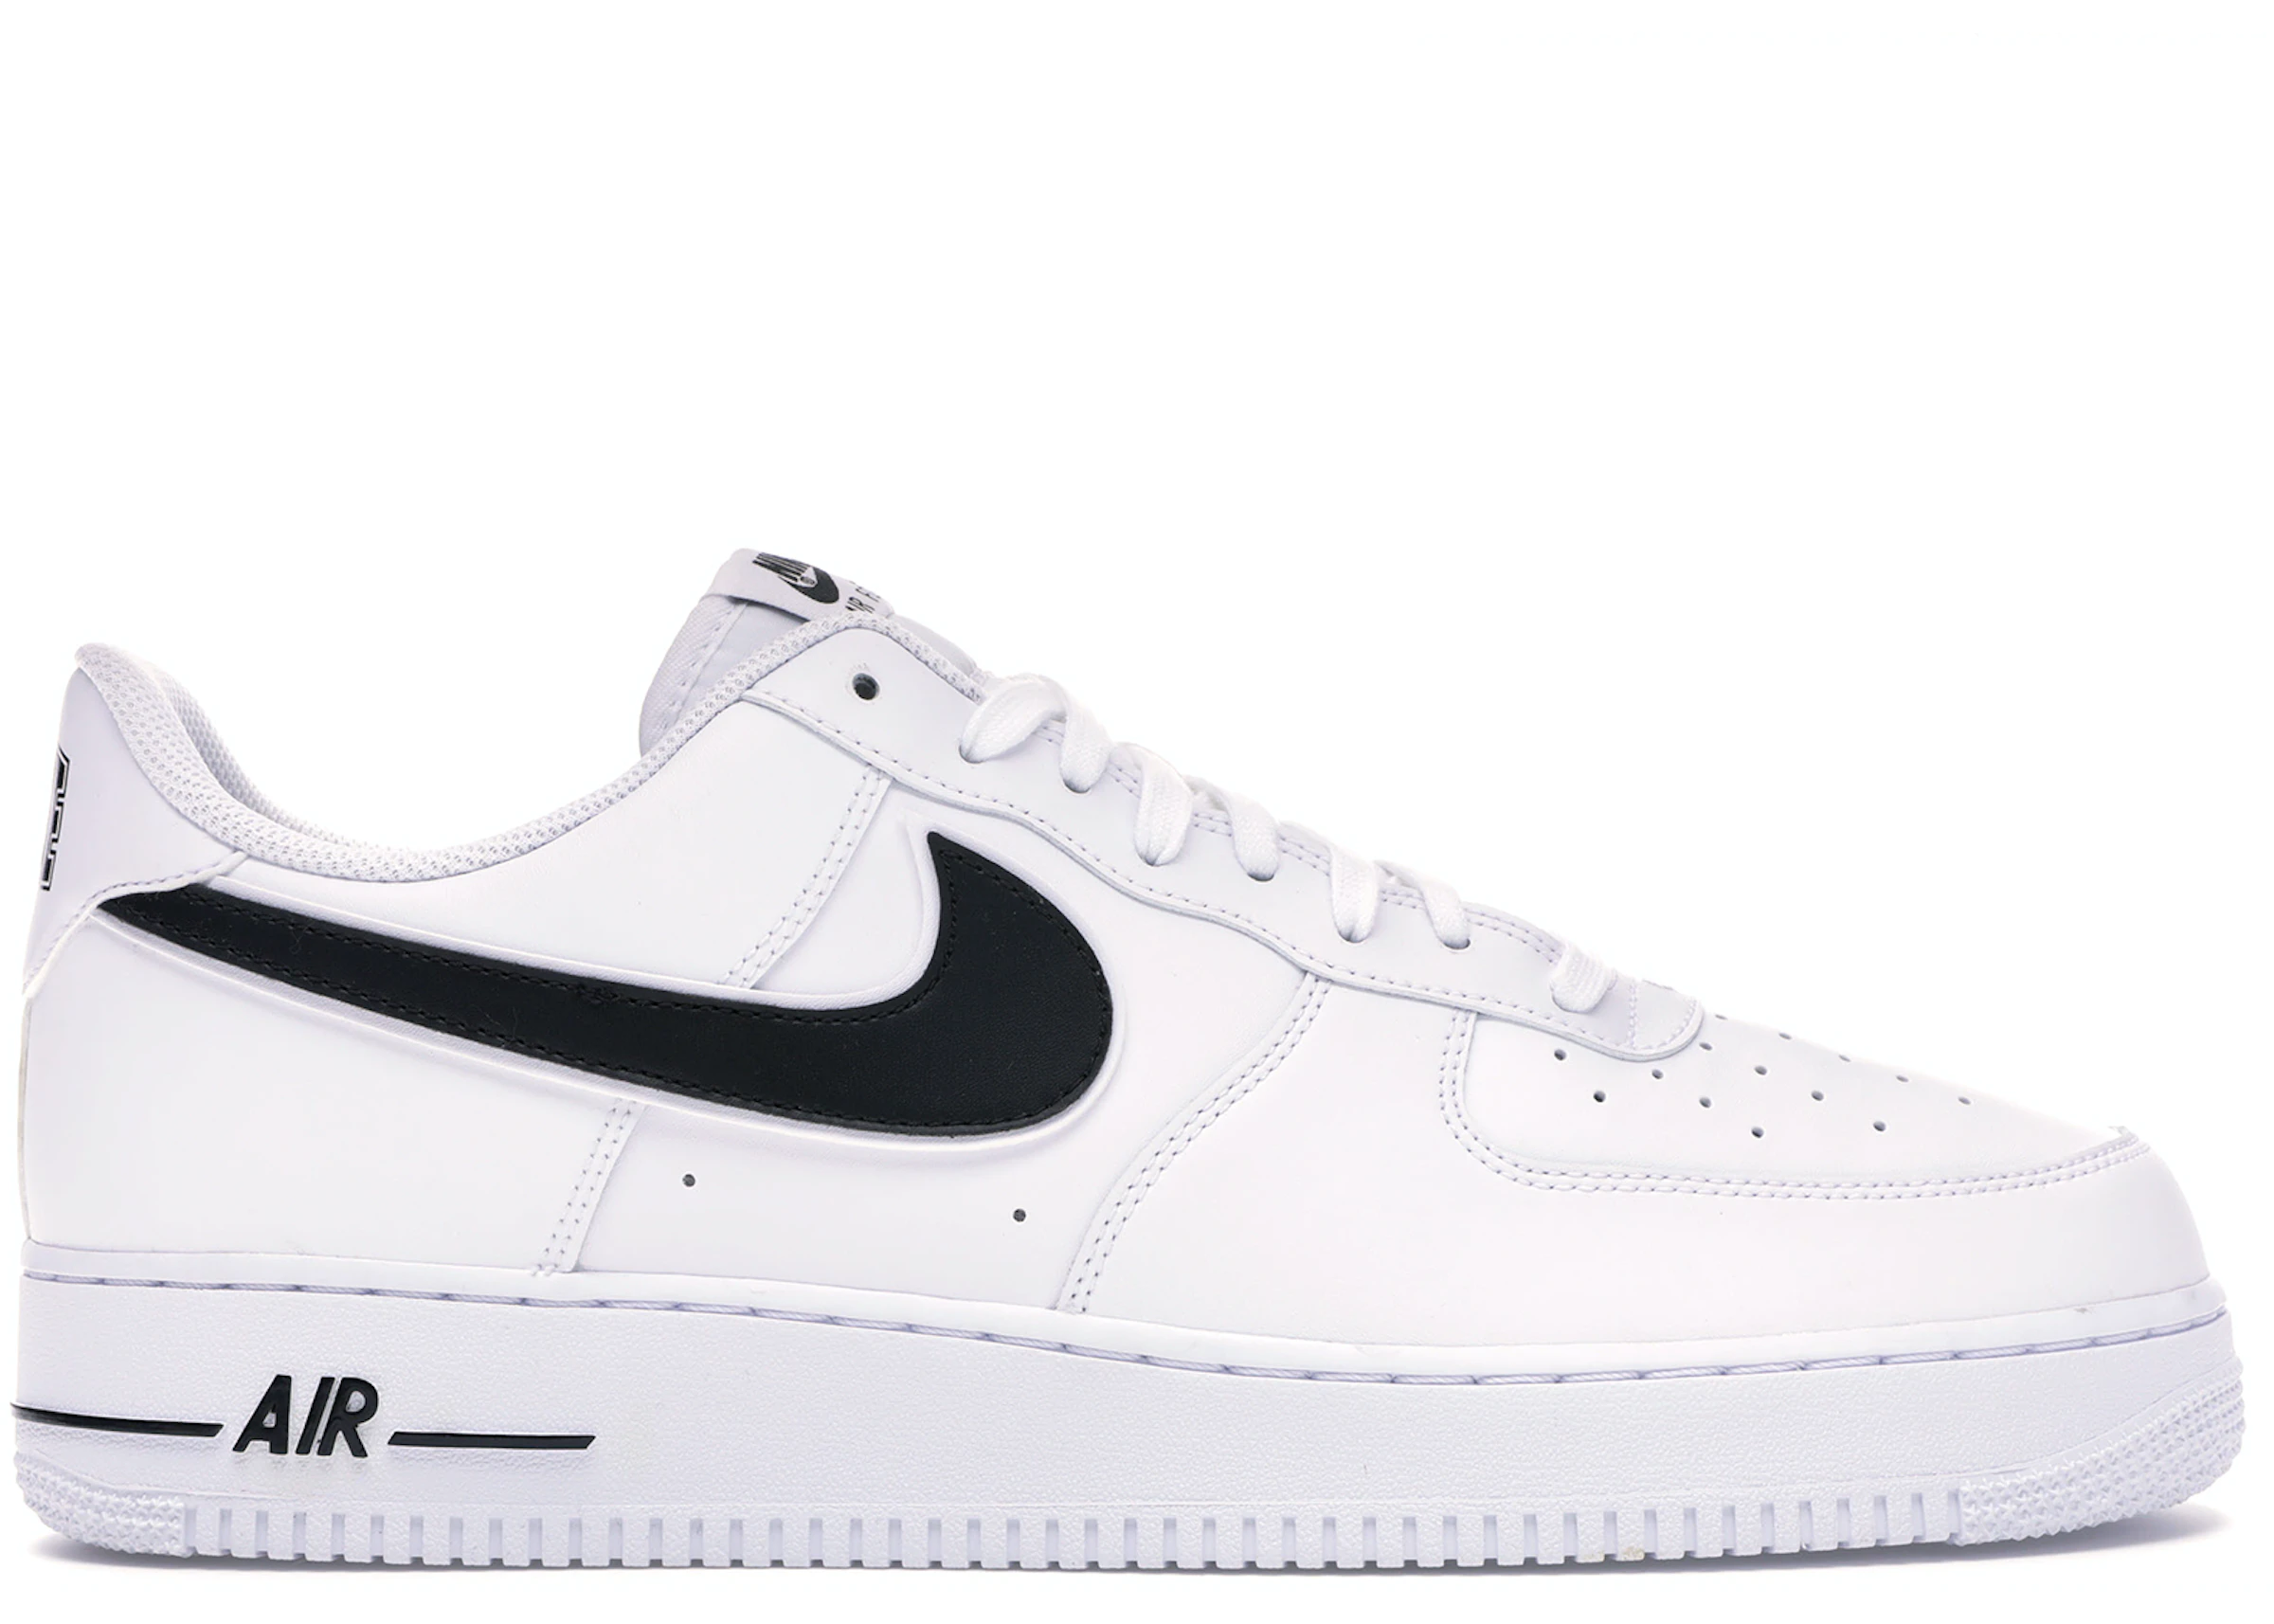 Hermano Anciano valor Nike Air Force 1 Low White Black (2018) - AO2423-101 - ES